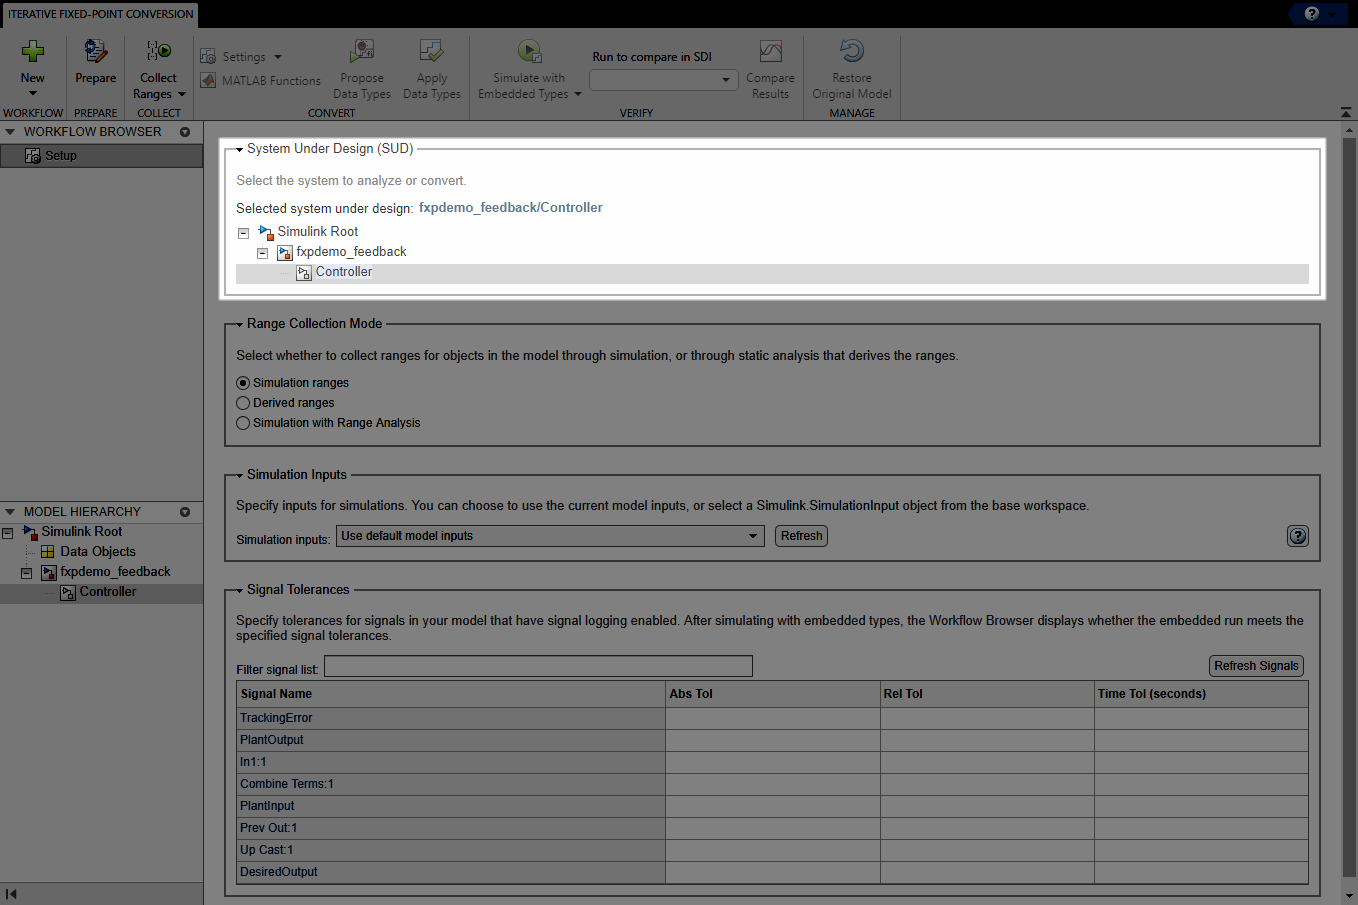 View of Setup pane in the Fixed-Point Tool. The System Under Design (SUD) section is highlighted.